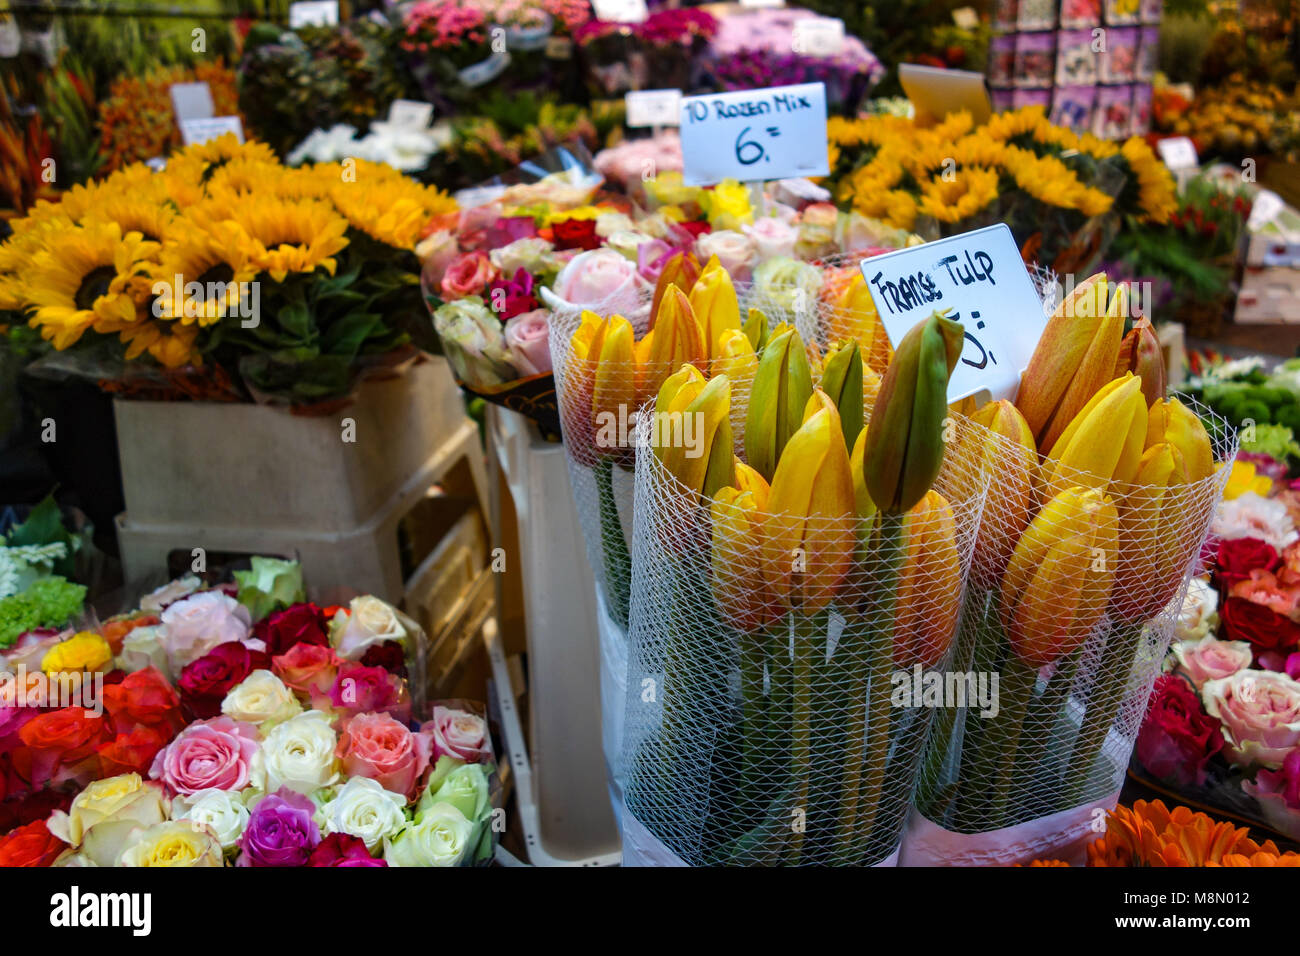 Dec 20, 2017 - Flowers and seeds on sale at the Bloemenmarkt, Flower Market, Amsterdam, Holland Stock Photo